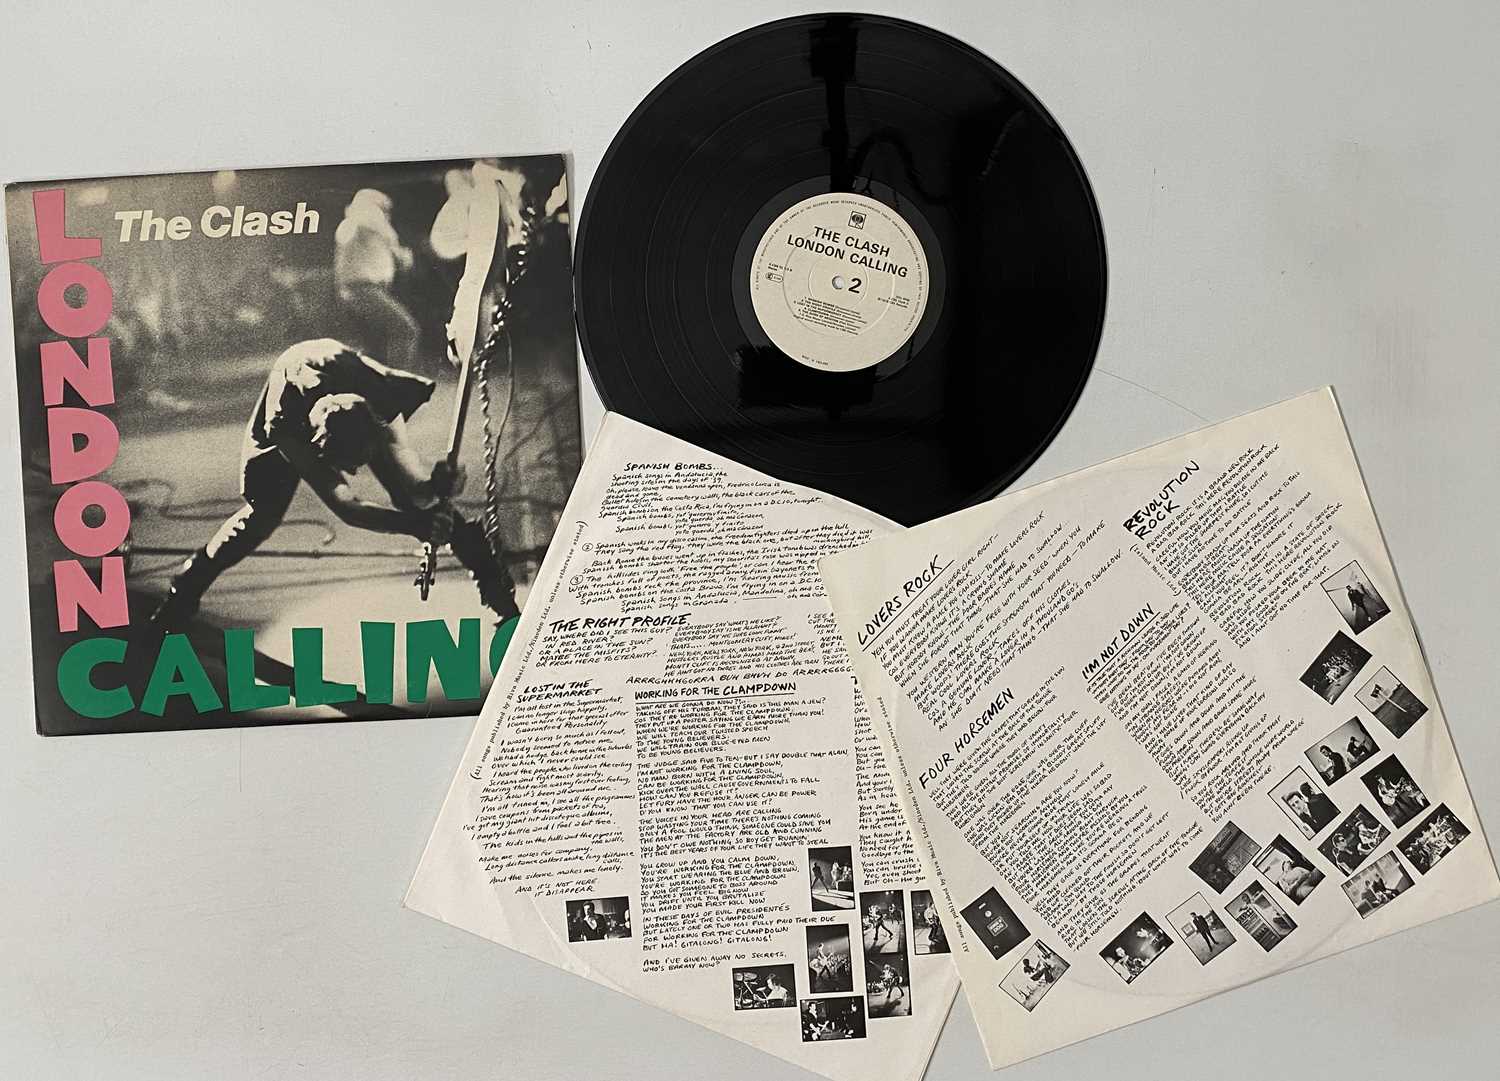 THE CLASH & RELATED - LPs - Image 3 of 6